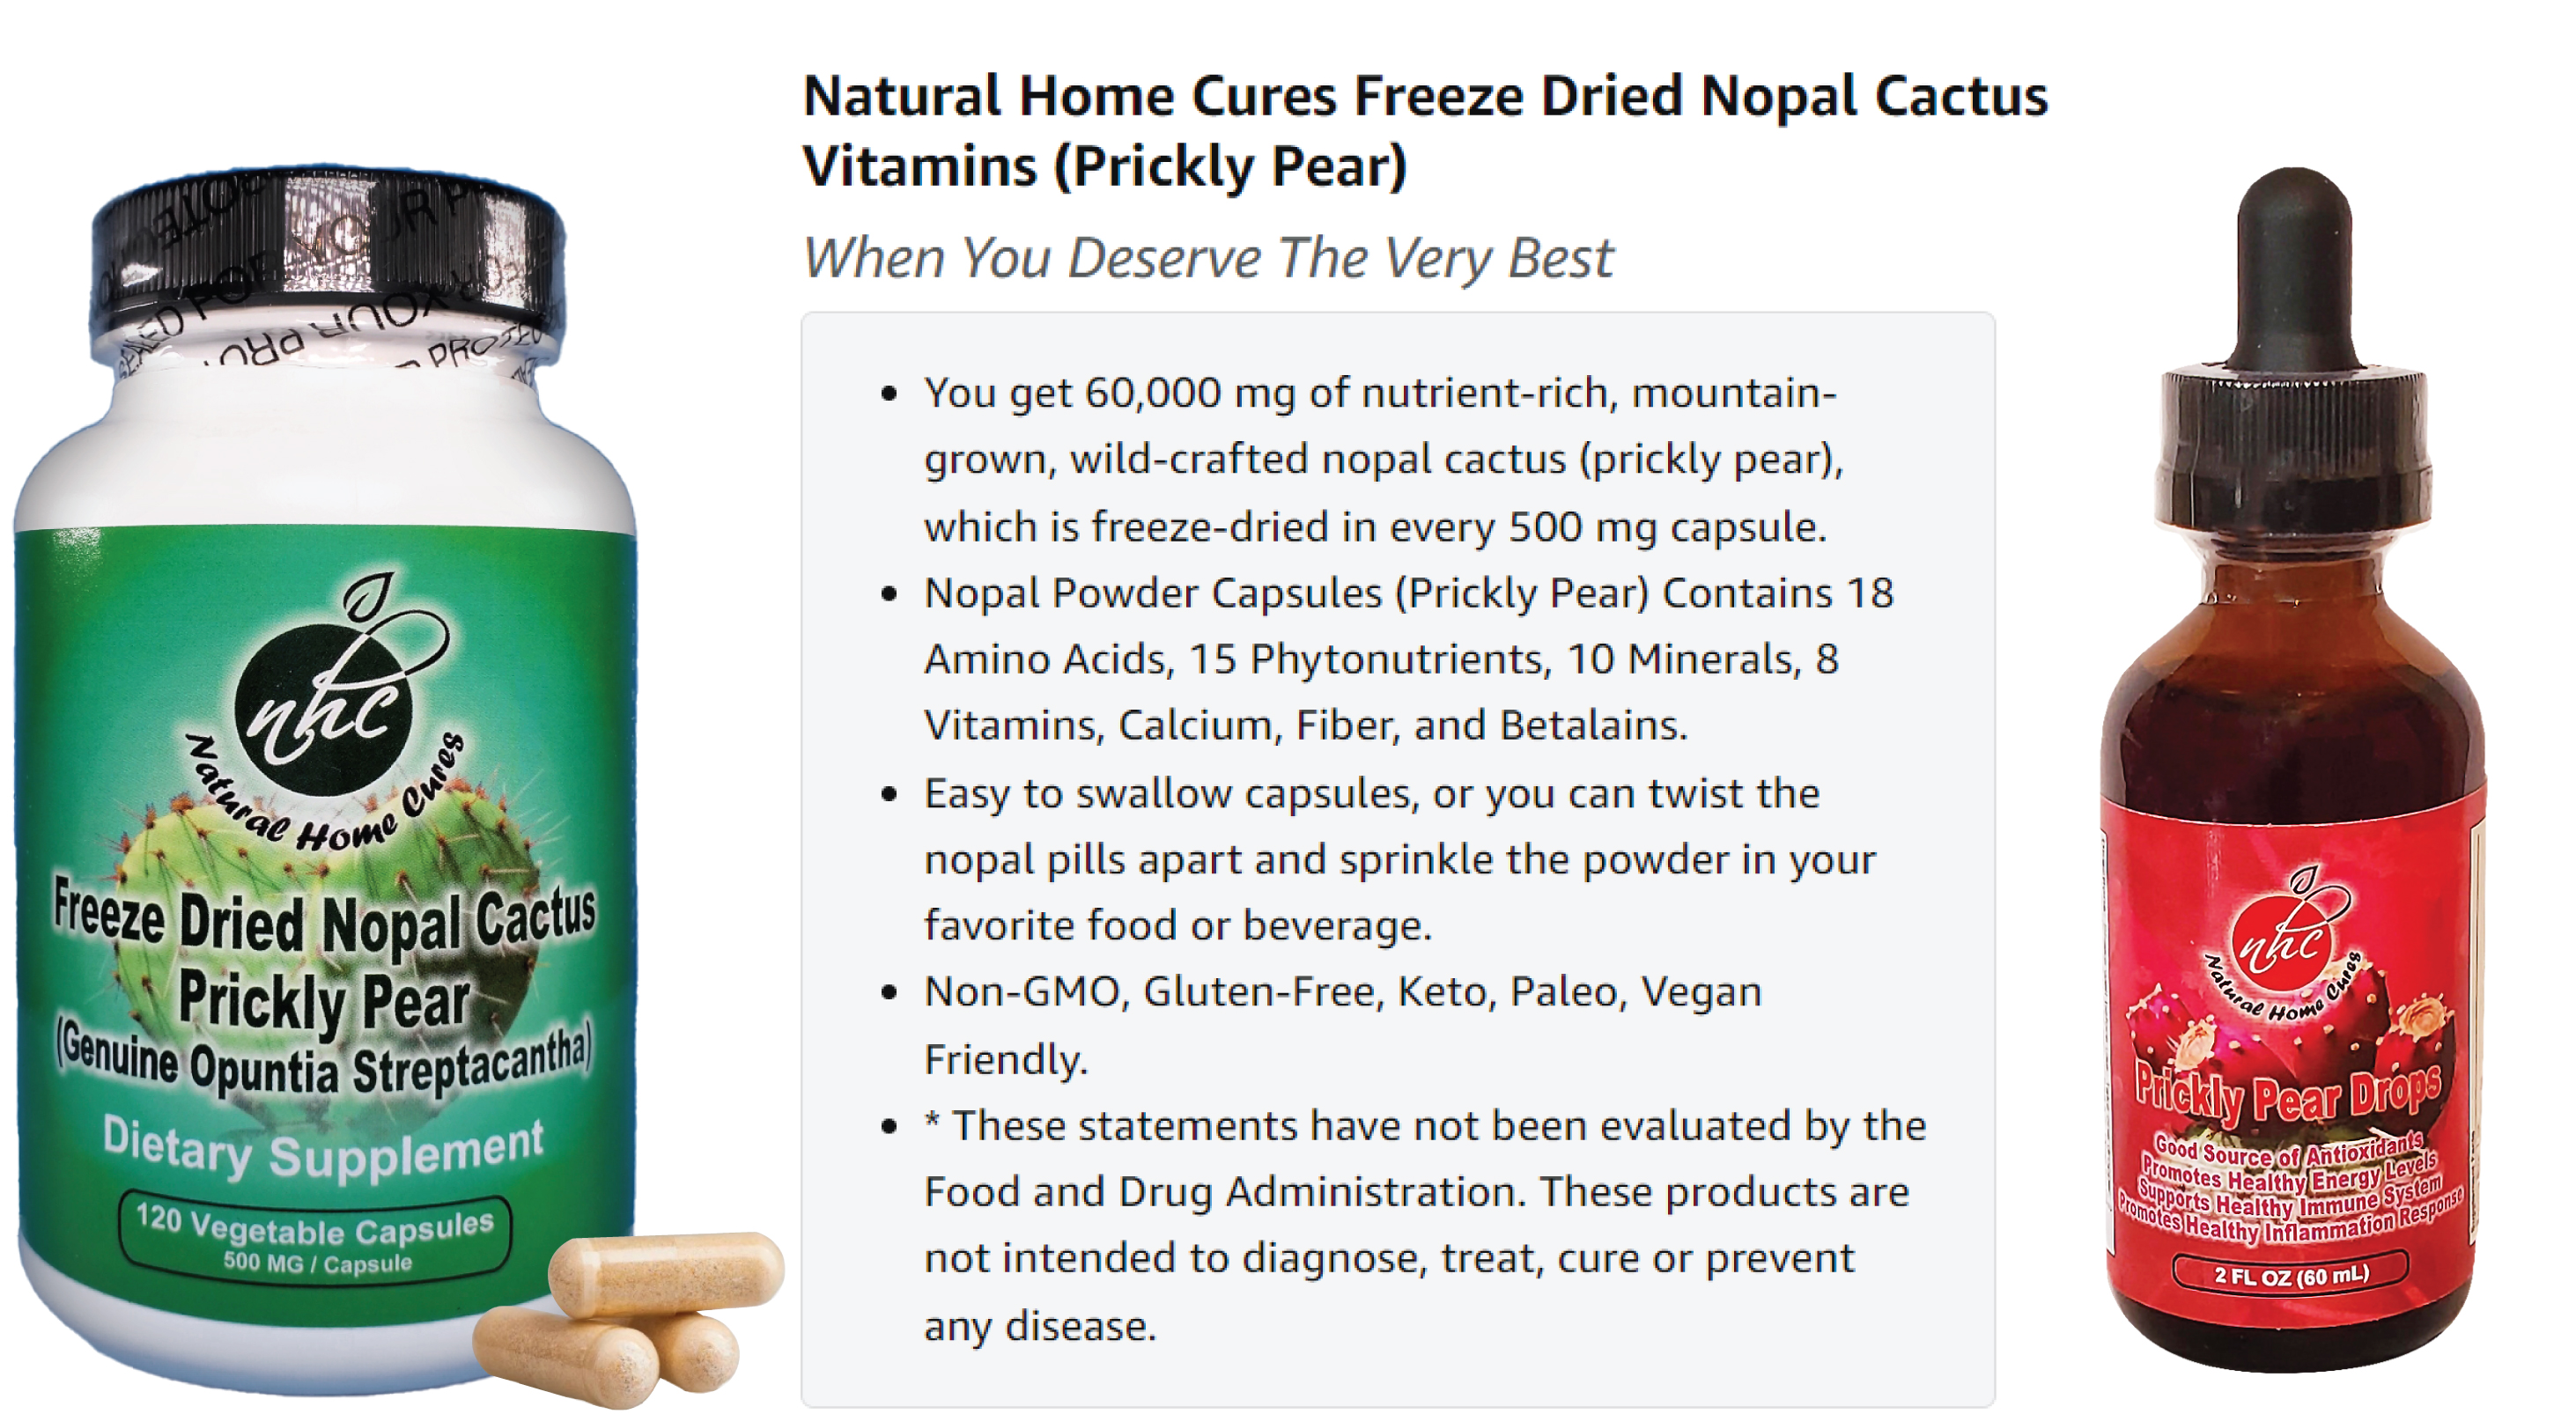 Natural Home Cures Freeze Dried Nopal Powder Capsules (Prickly Pear Supplements) Drops 